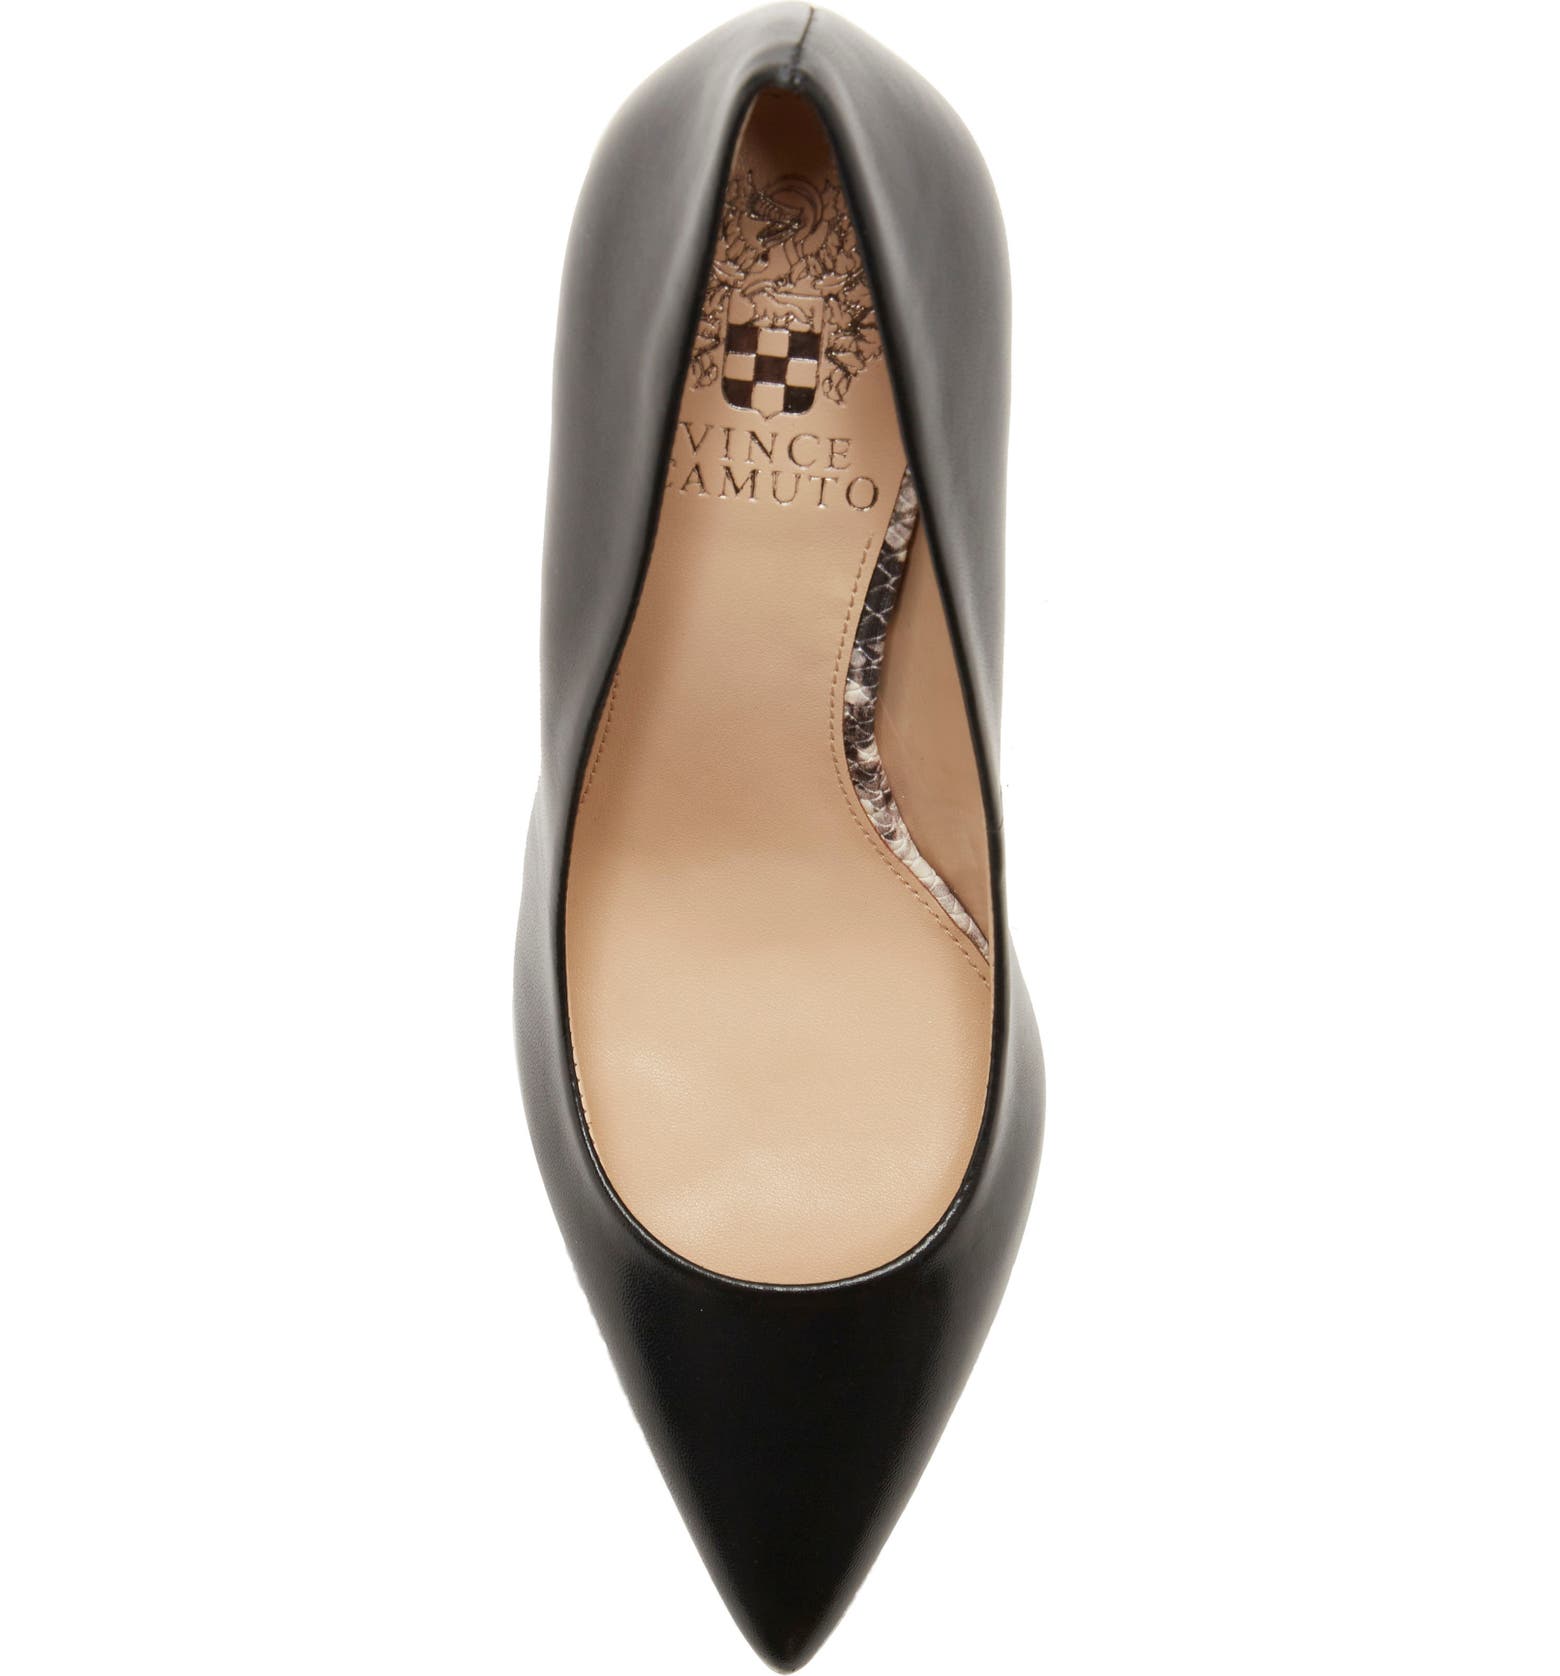 Vince Camuto Thanley Pointed Toe Pump (Women) | Nordstrom